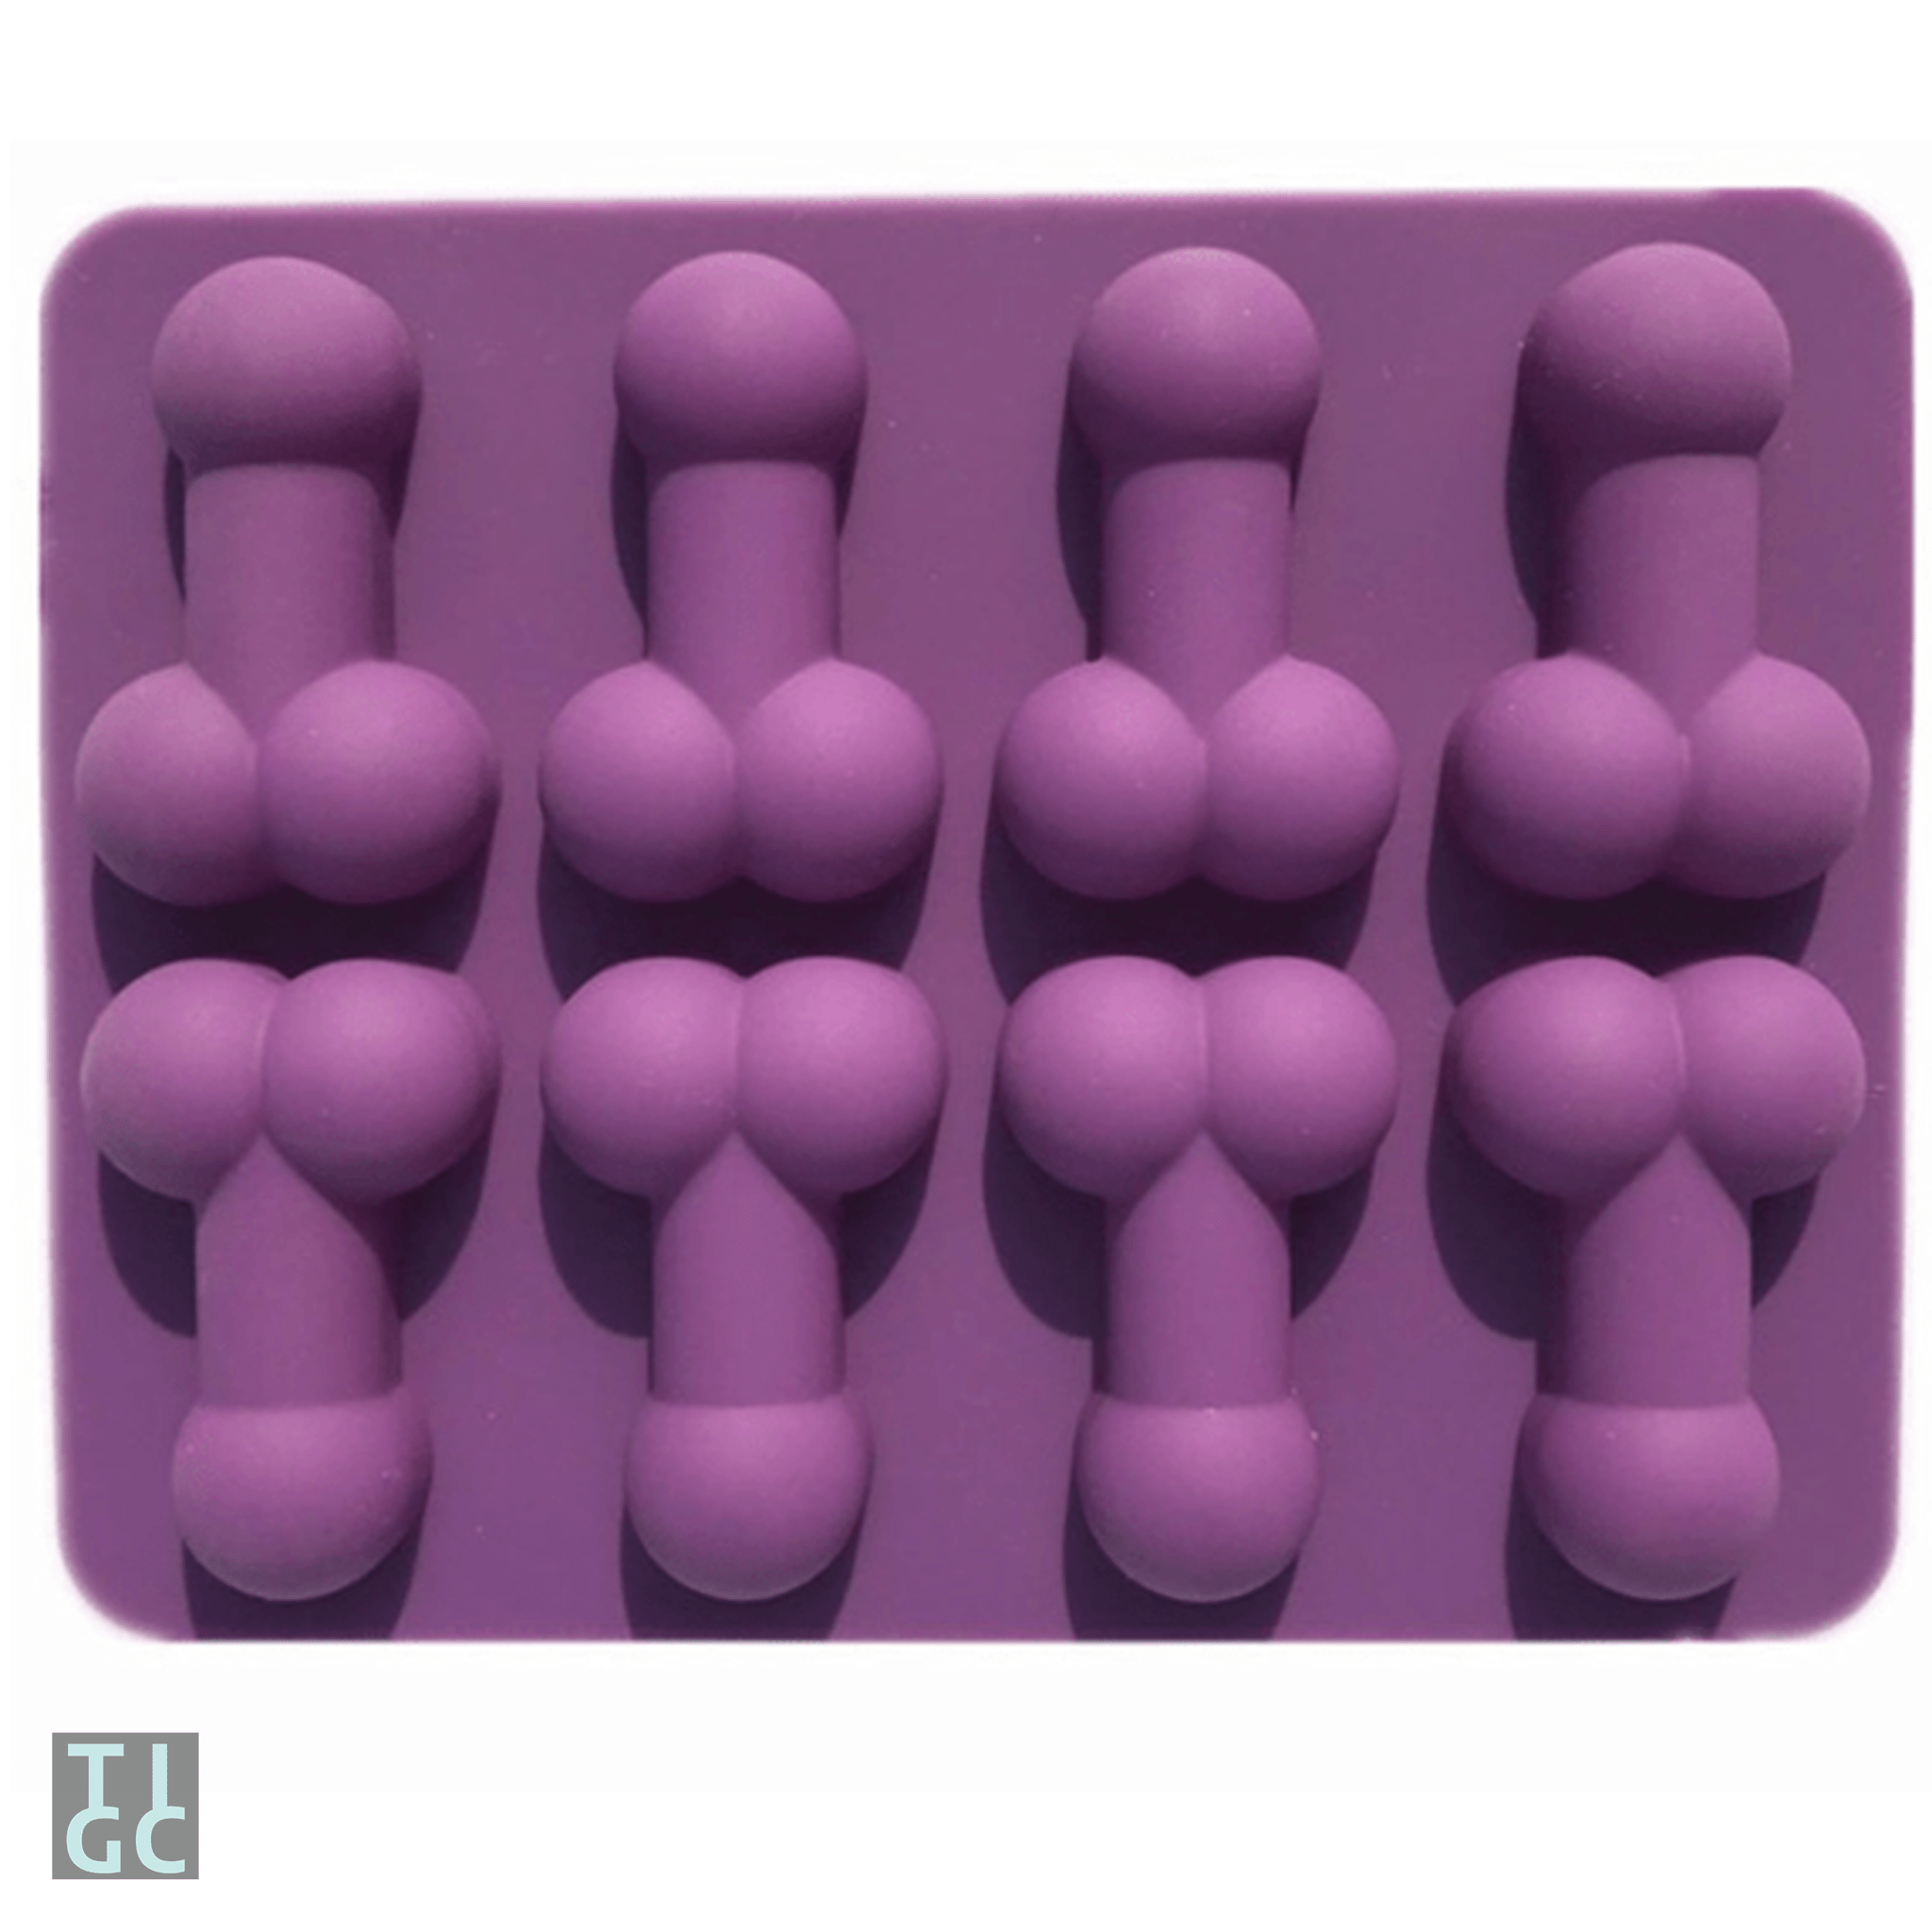 https://theinappropriategiftco.com/cdn/shop/products/tigc-the-inappropriate-gift-co-inappropriate-penis-ice-cube-chocolate-mould-29922731163690_5000x.png?v=1666506102